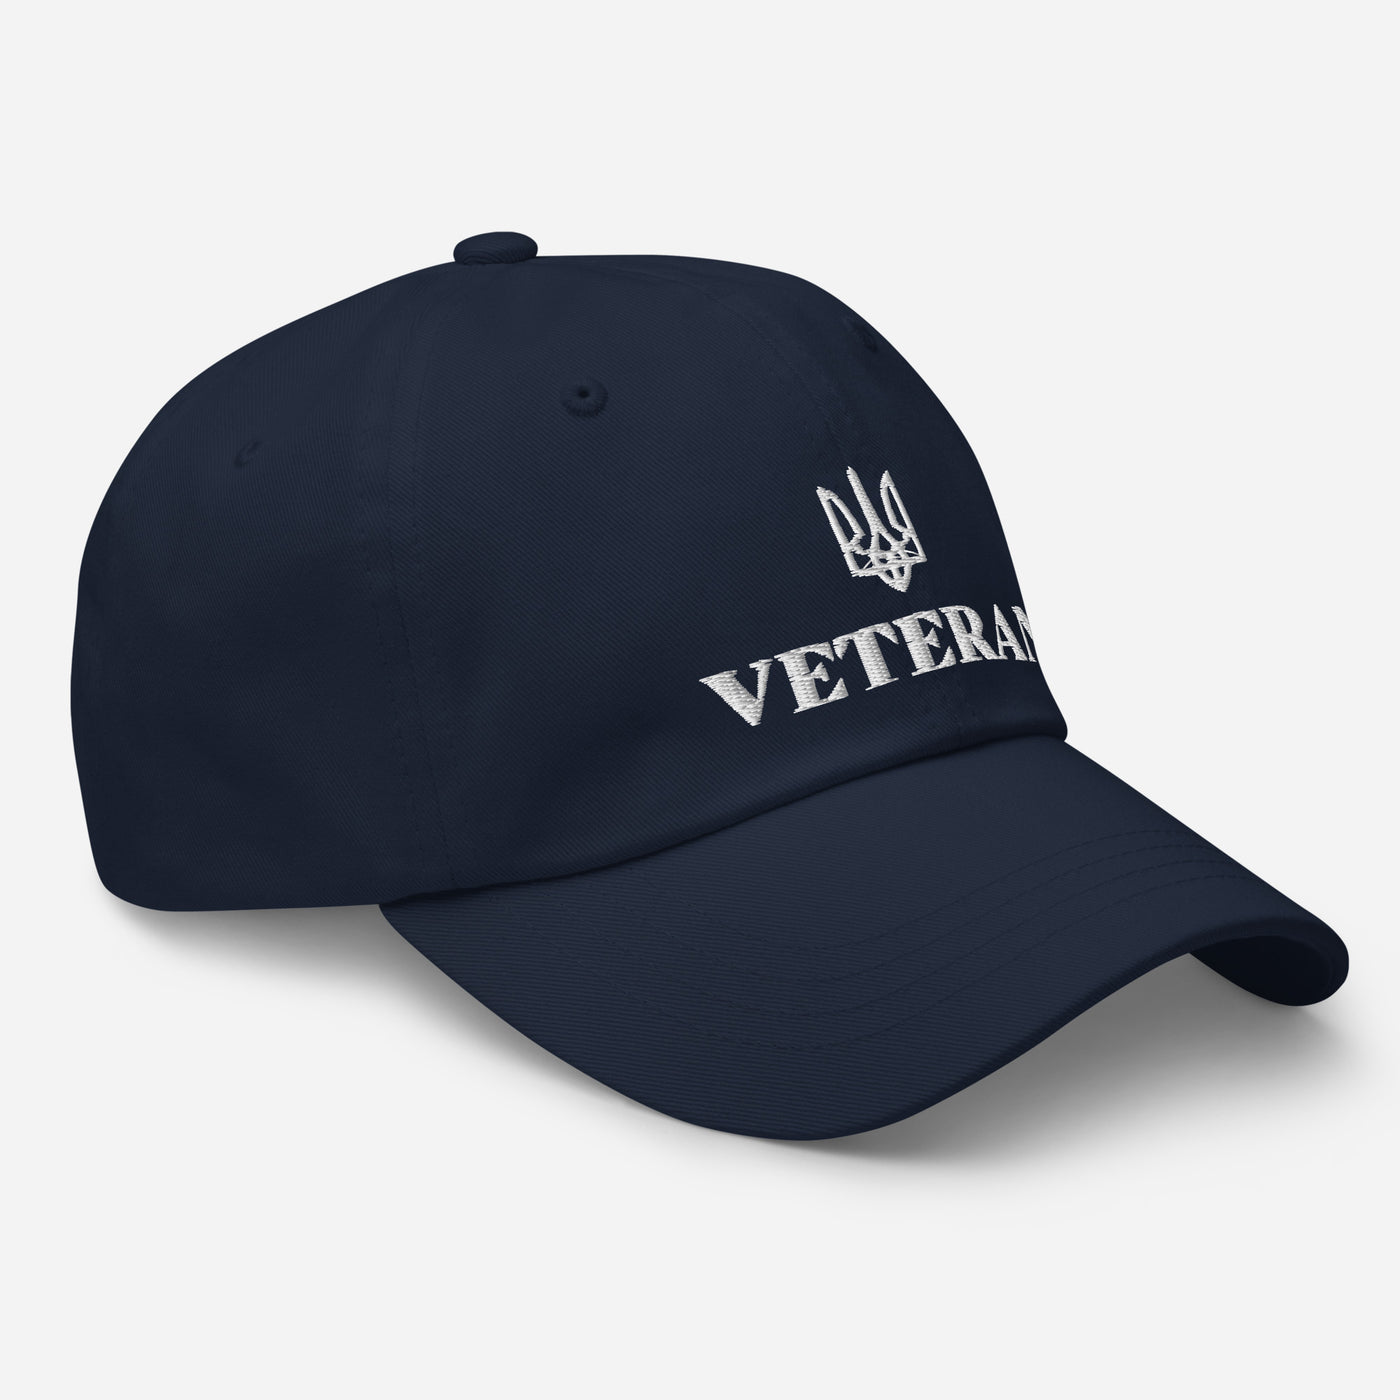 Trident of Freedom Cap VETERAN Embroidery